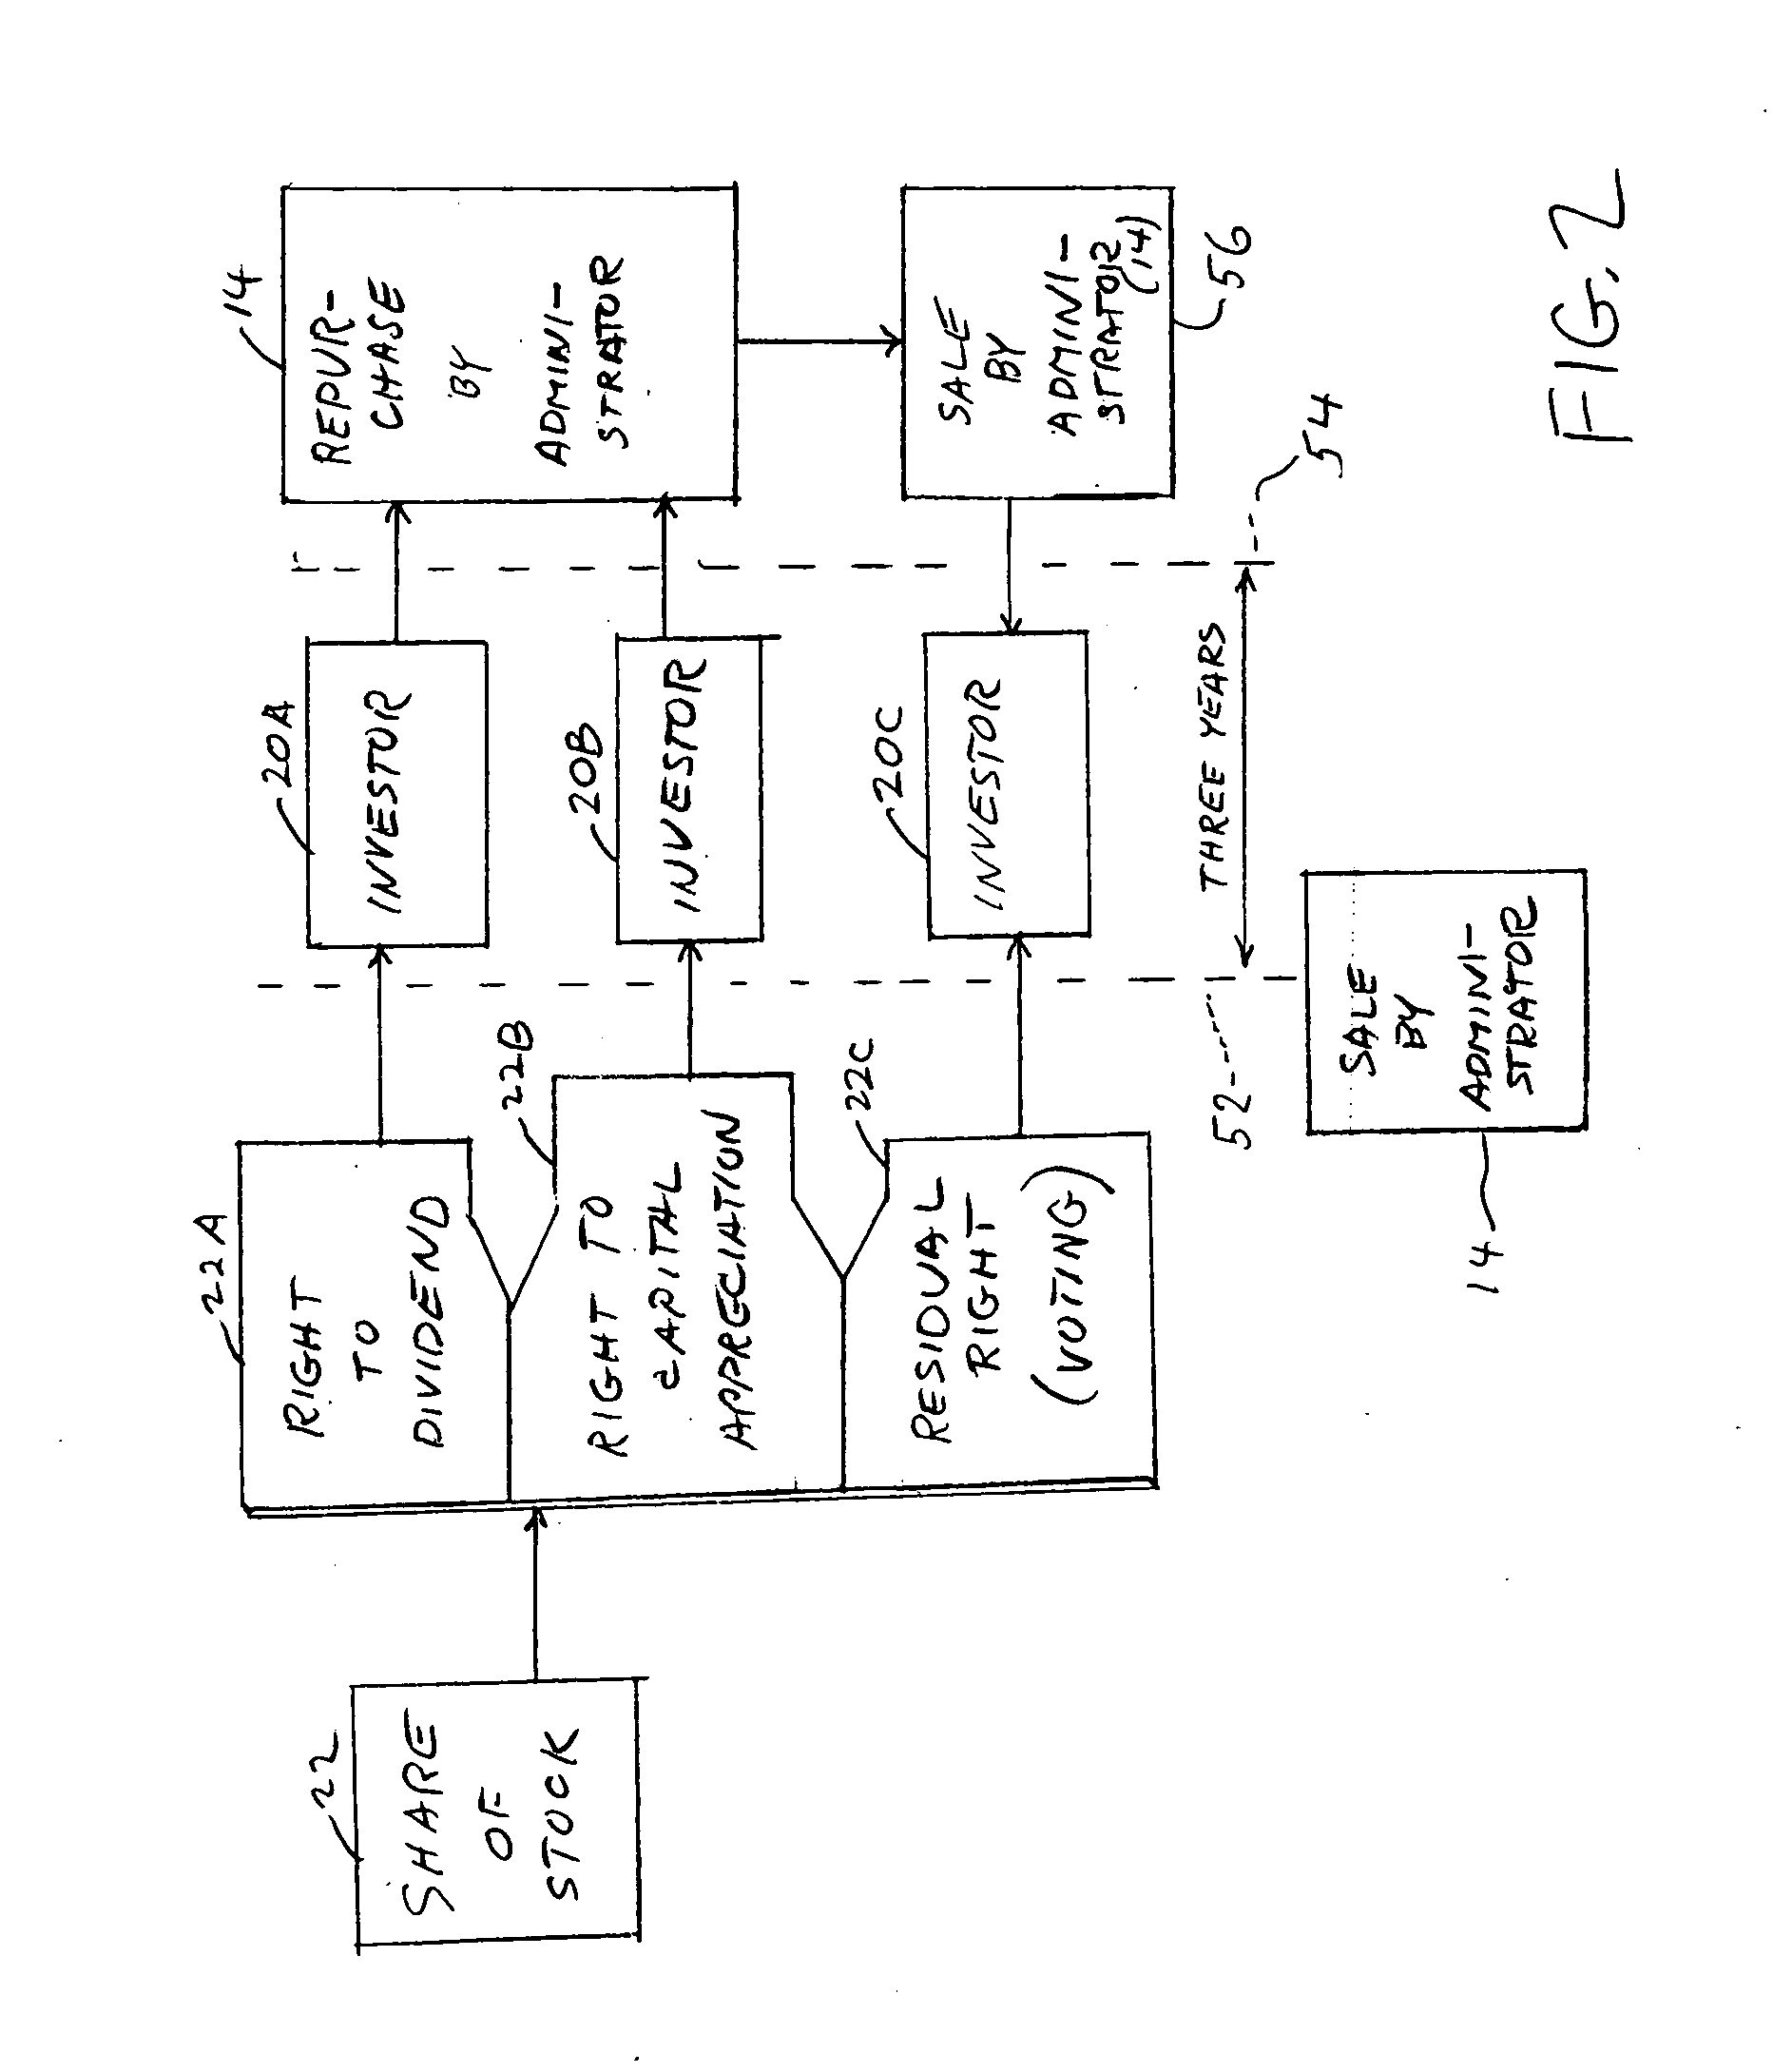 Method of distribution and management of fractional interests in a property or security